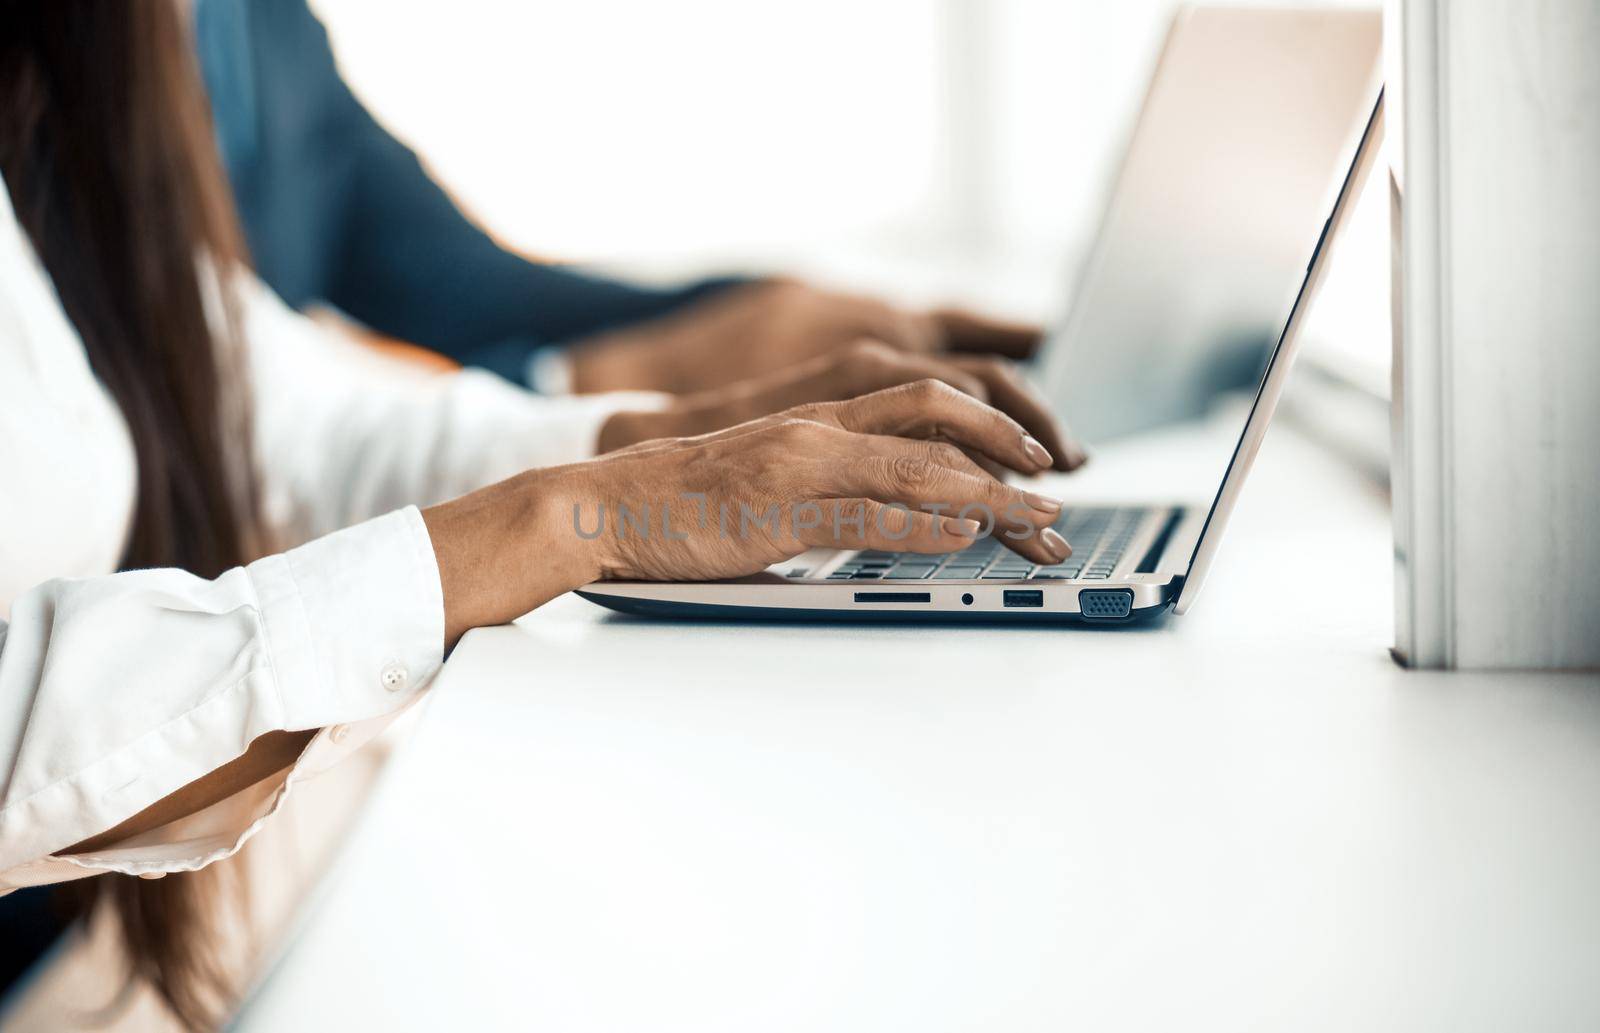 Businesspeople typing on laptop keyboard. Close up of Caucasian female hands working on computer at office desk. Copy space at bottom of image by LipikStockMedia